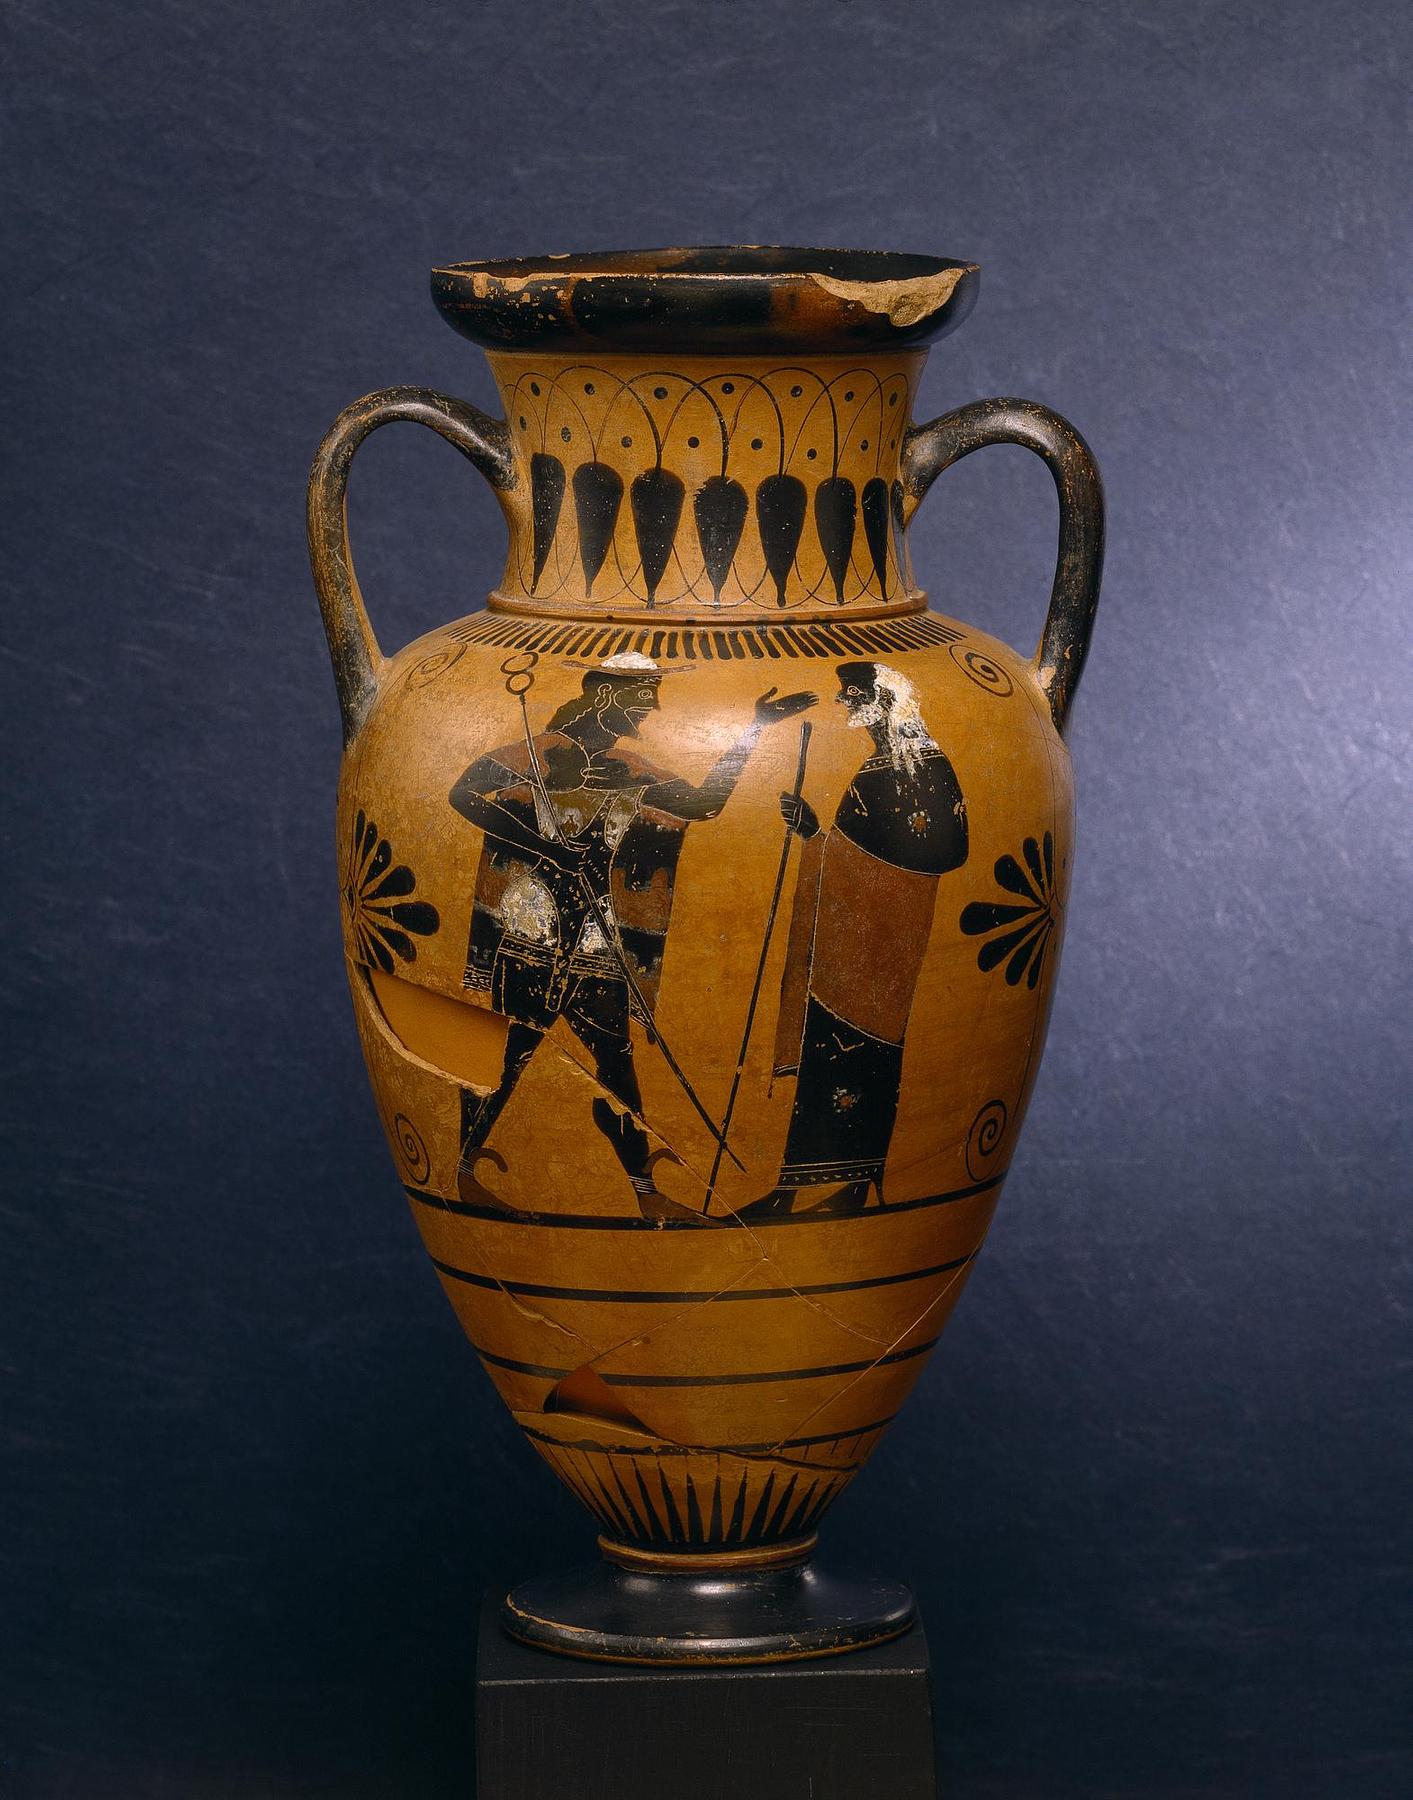 Amphora with Heracles and Triton (A) and Hermes and Nereus (B), H541